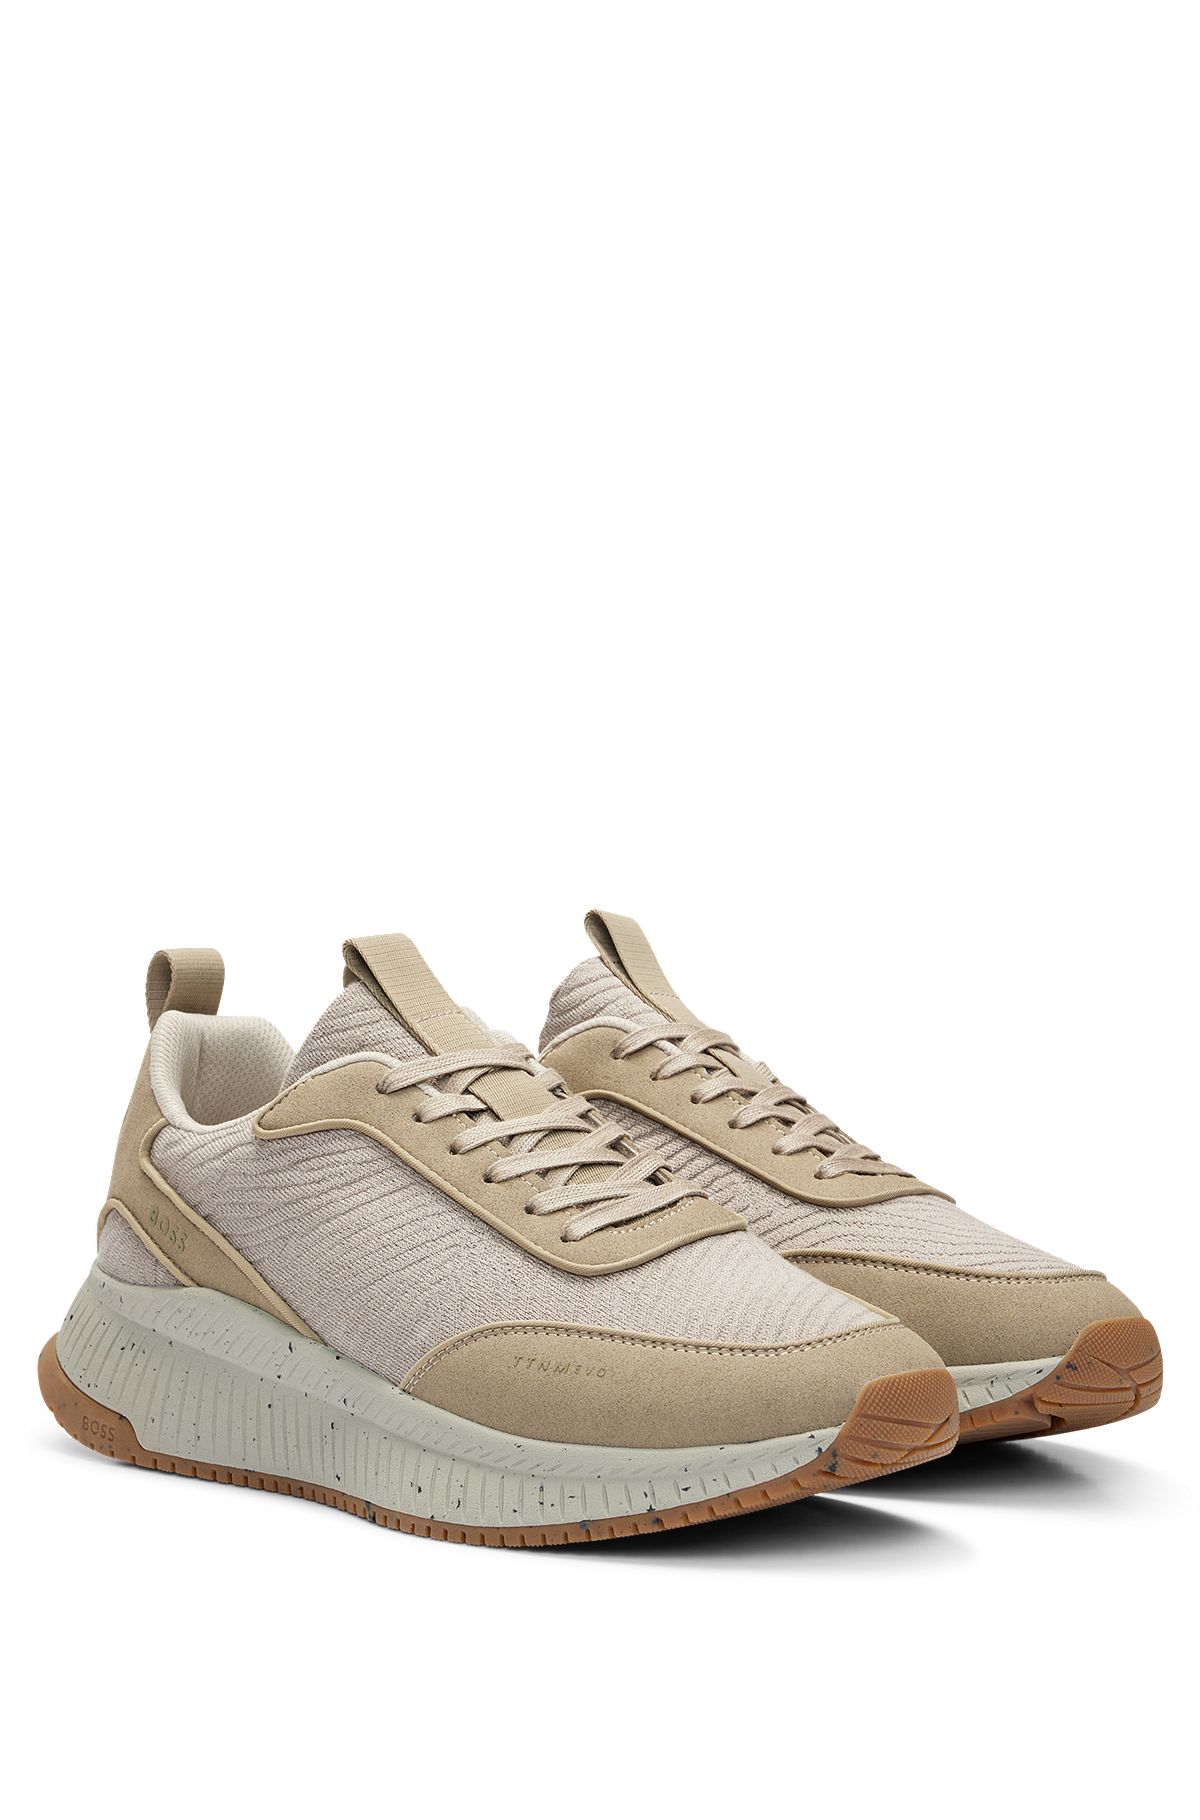 Mixed-material trainers with logo details and speckled effect, Light Beige